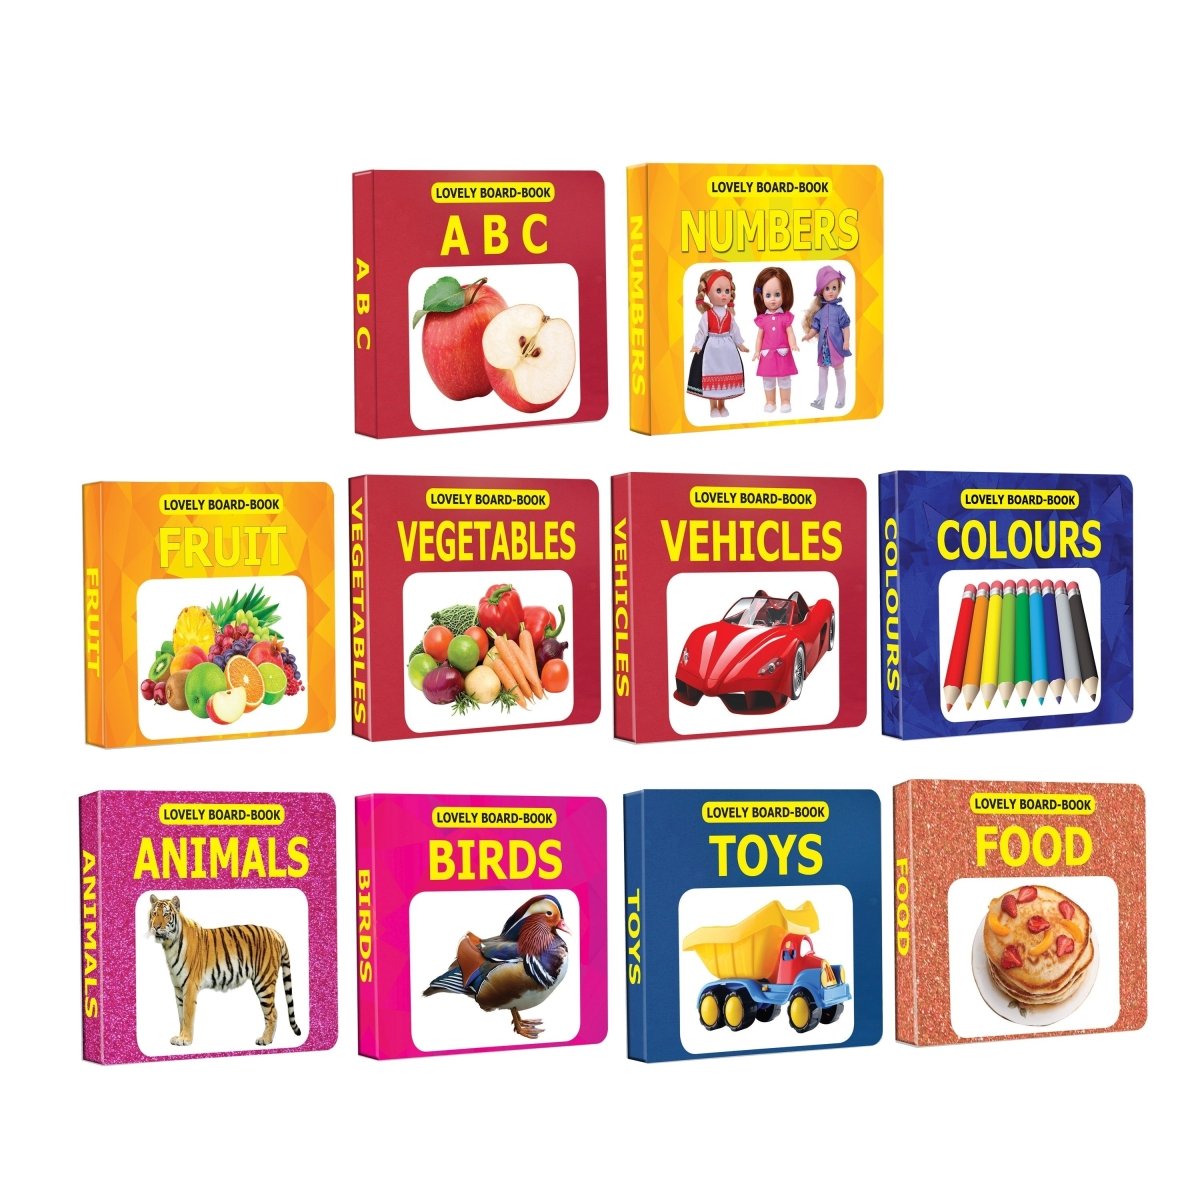 Dreamland Publications Lovely Board Books Gift Pack (10 Titles) - 9788184511598